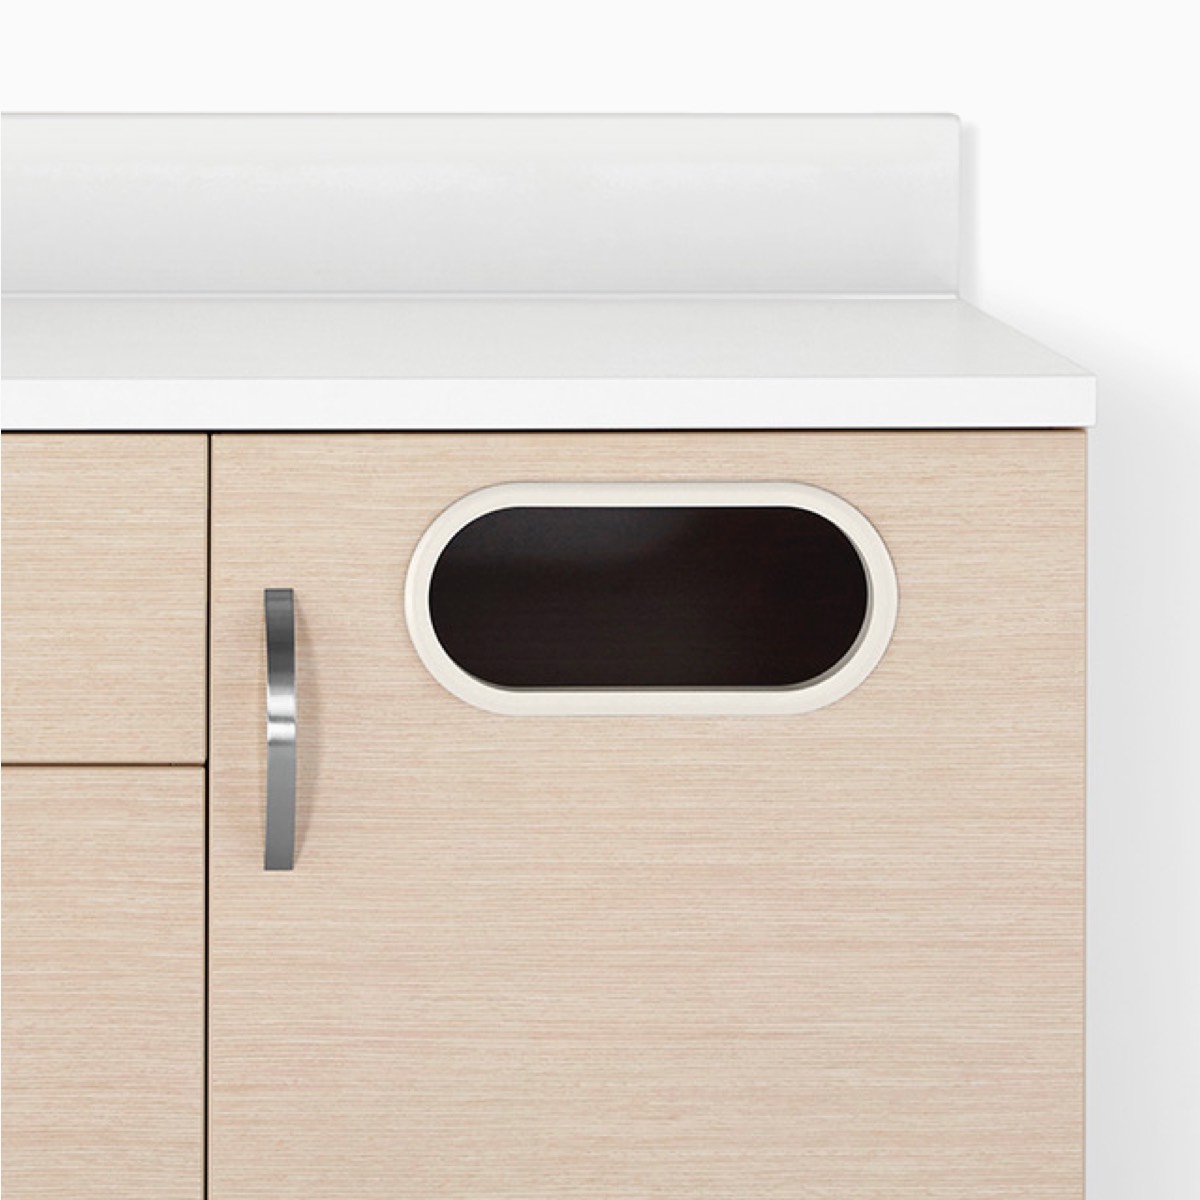 A close-up view of a Mora Systems casework trash receptacle cabinet in an ash wood finish.